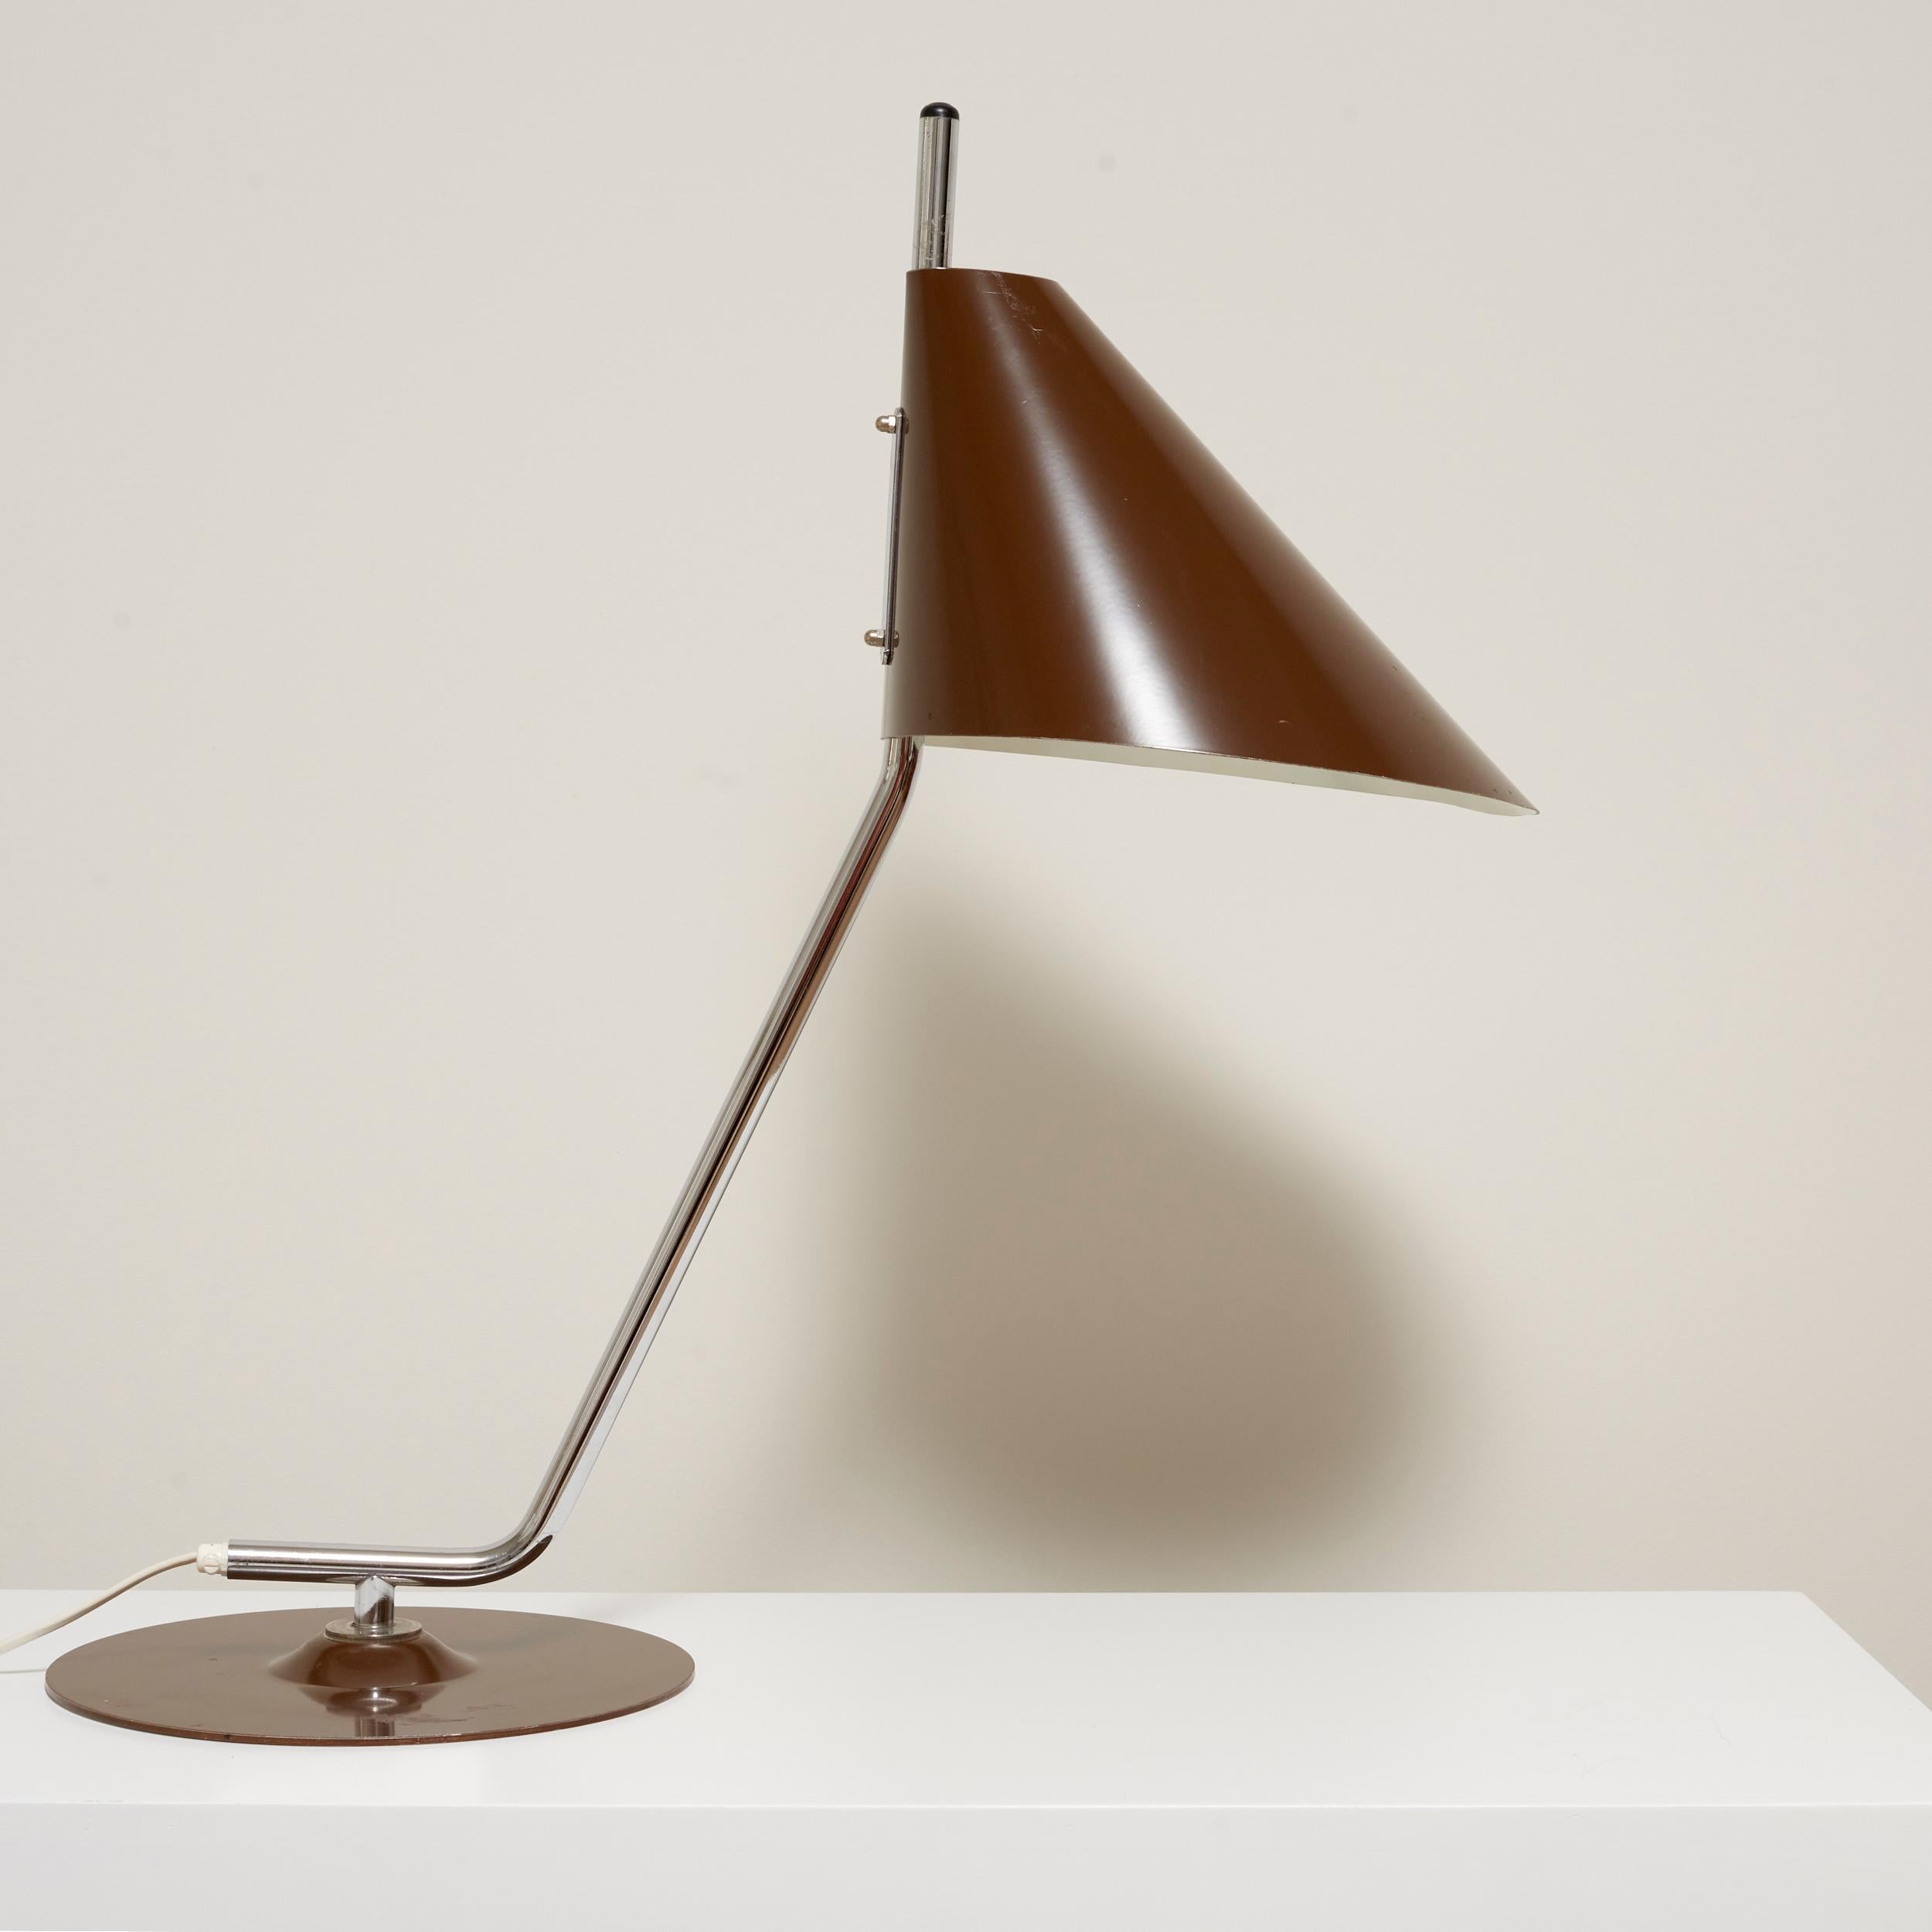 Adjustable lampshade and round foot in metal in a very good vintage condition. Model B260 marked Hans-Agne Jakobsson Markaryd AB. 
Hans-Agne Jakobsson was a Swedish interior and furniture designer. He was famed for his lighting designs which